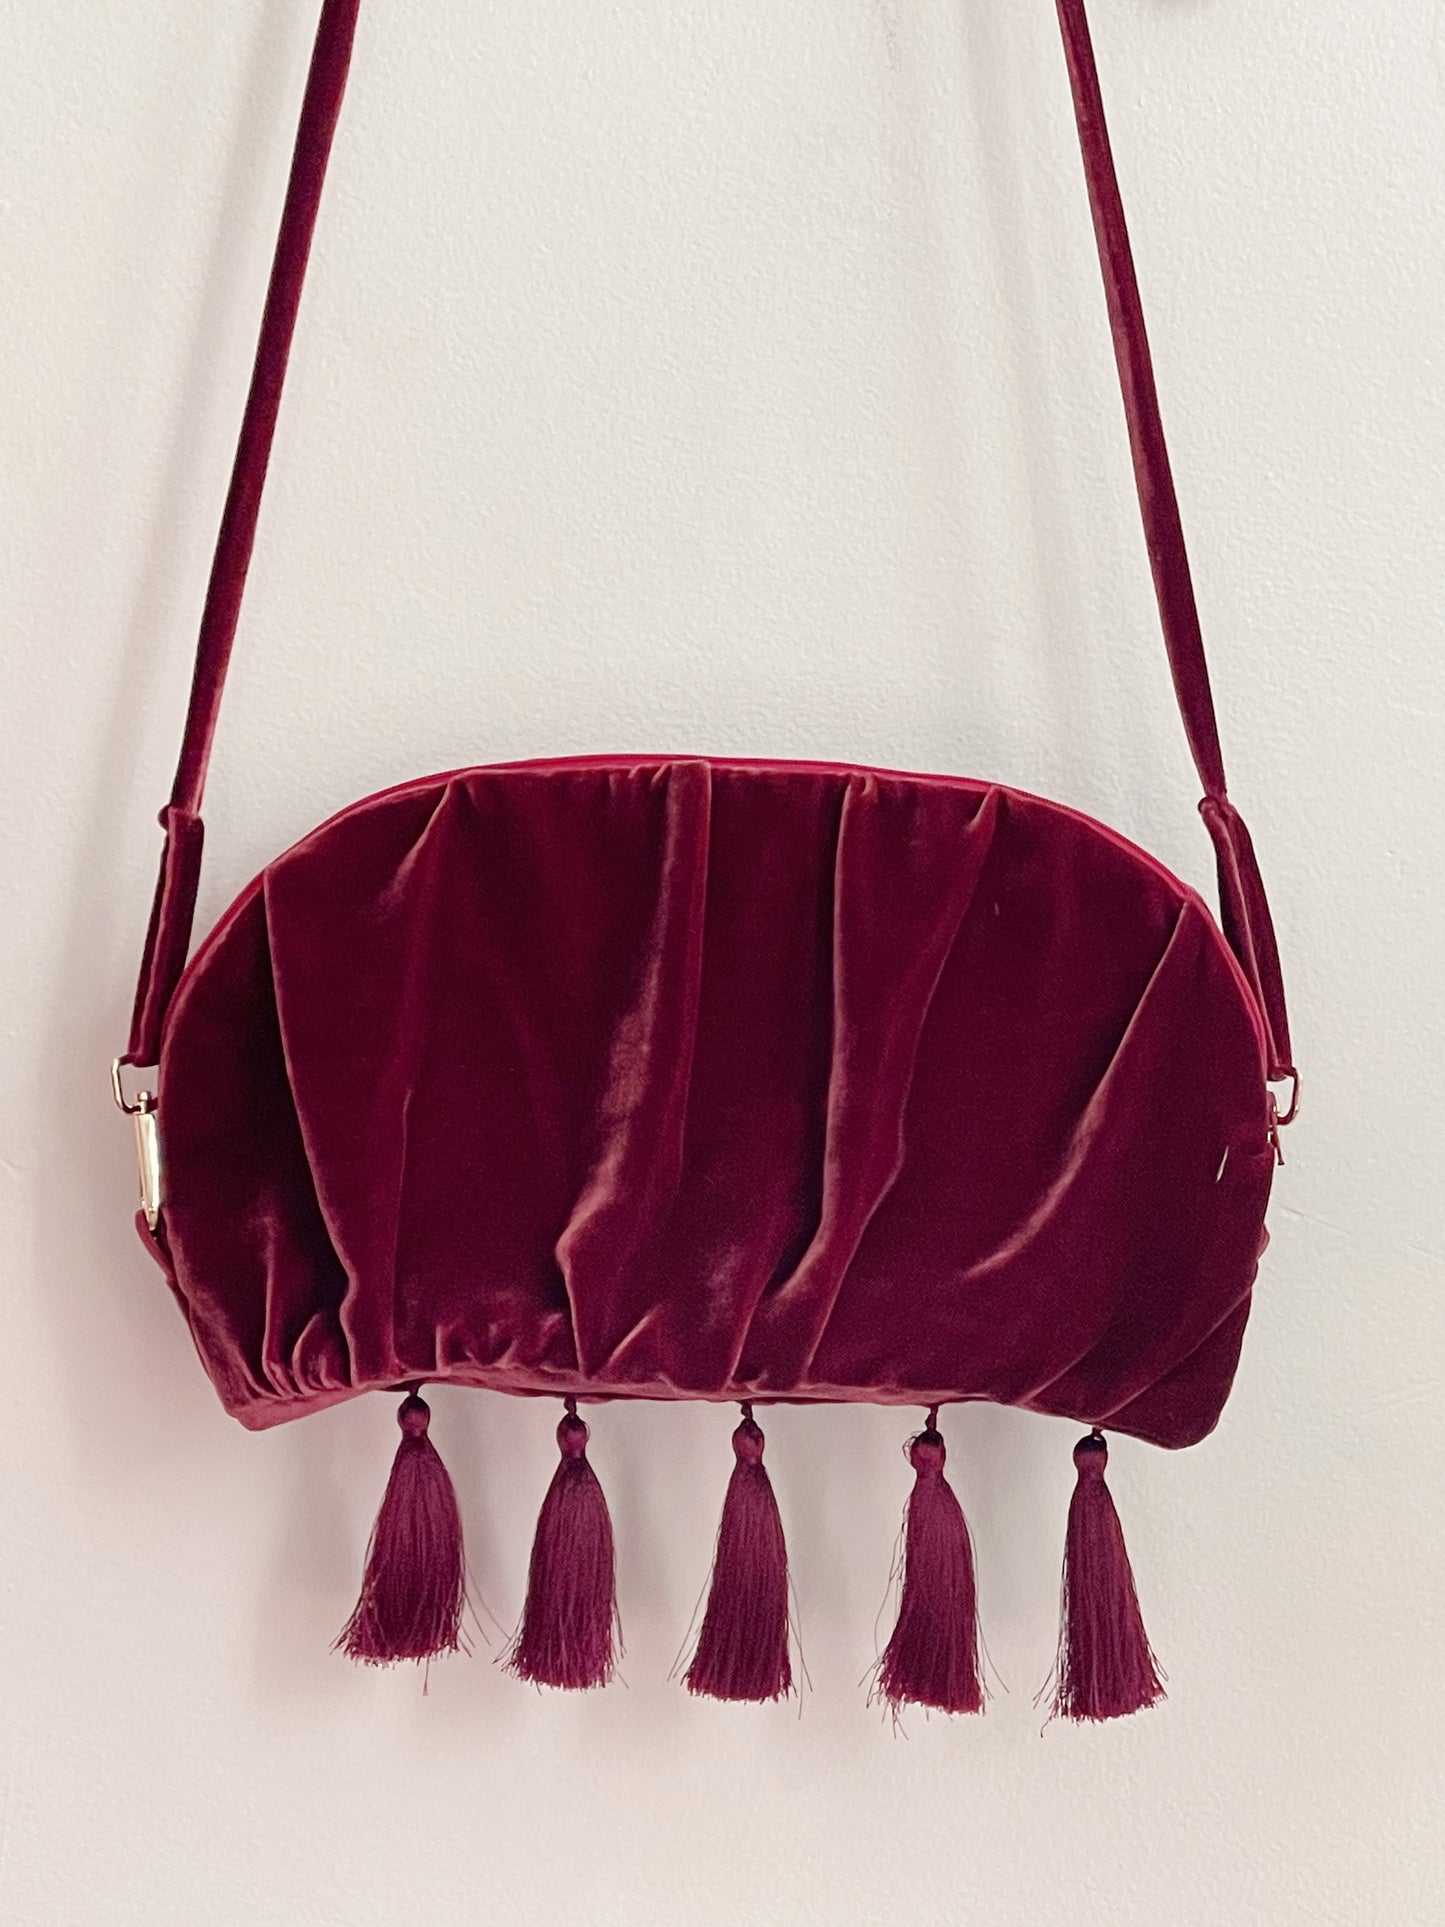 Curtain Call Bag (sold out)